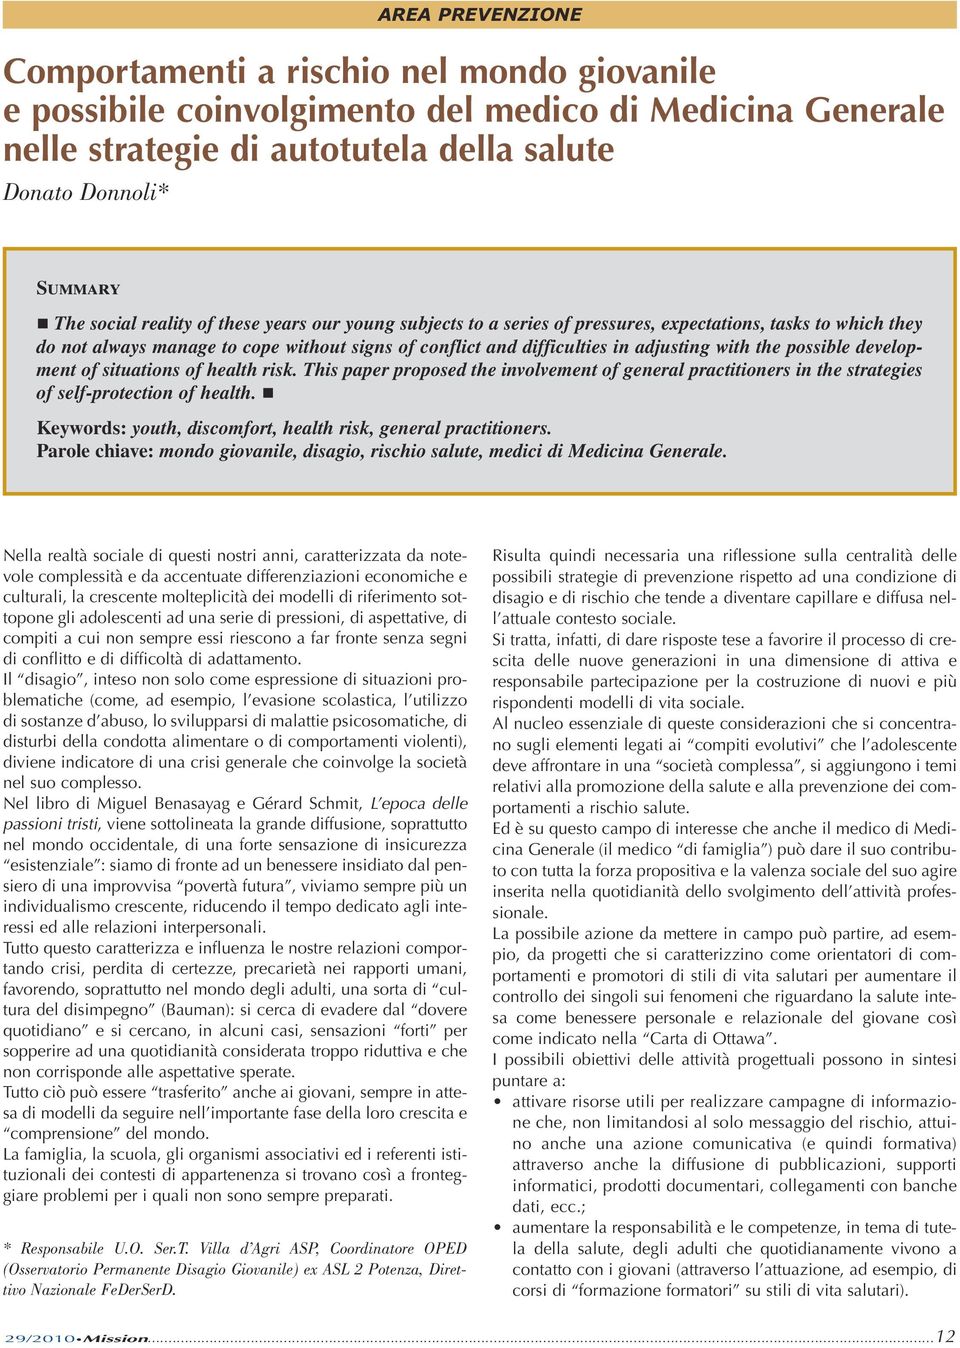 possible development of situations of health risk. This paper proposed the involvement of general practitioners in the strategies of self-protection of health.